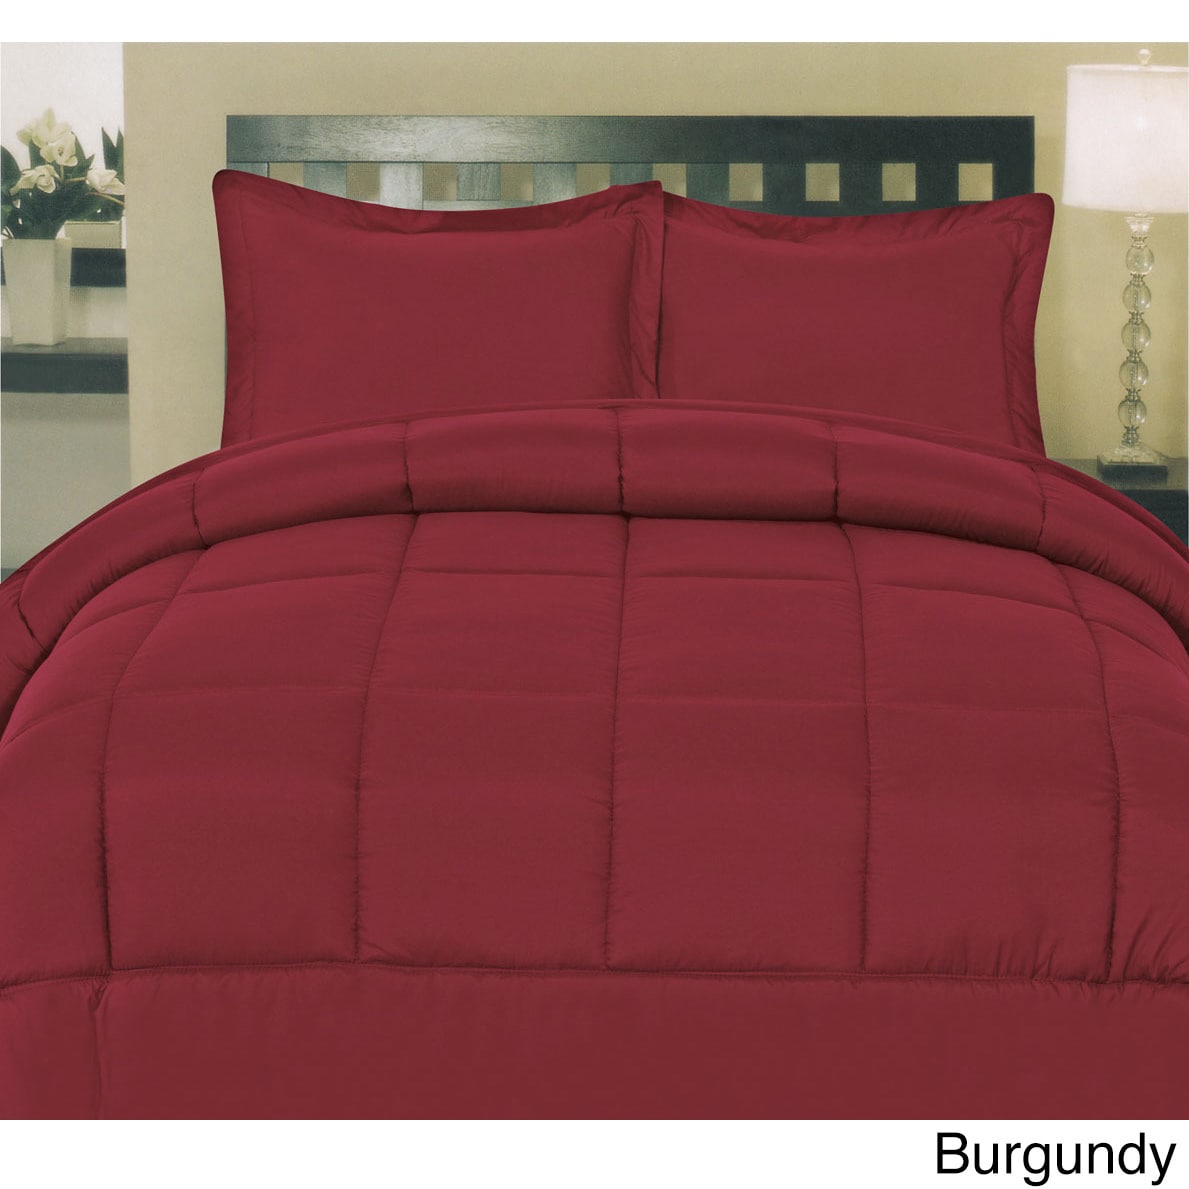 Bed Bath N More Plush Solid Color Box Stitch Down Alternative Comforter Red Size Twin